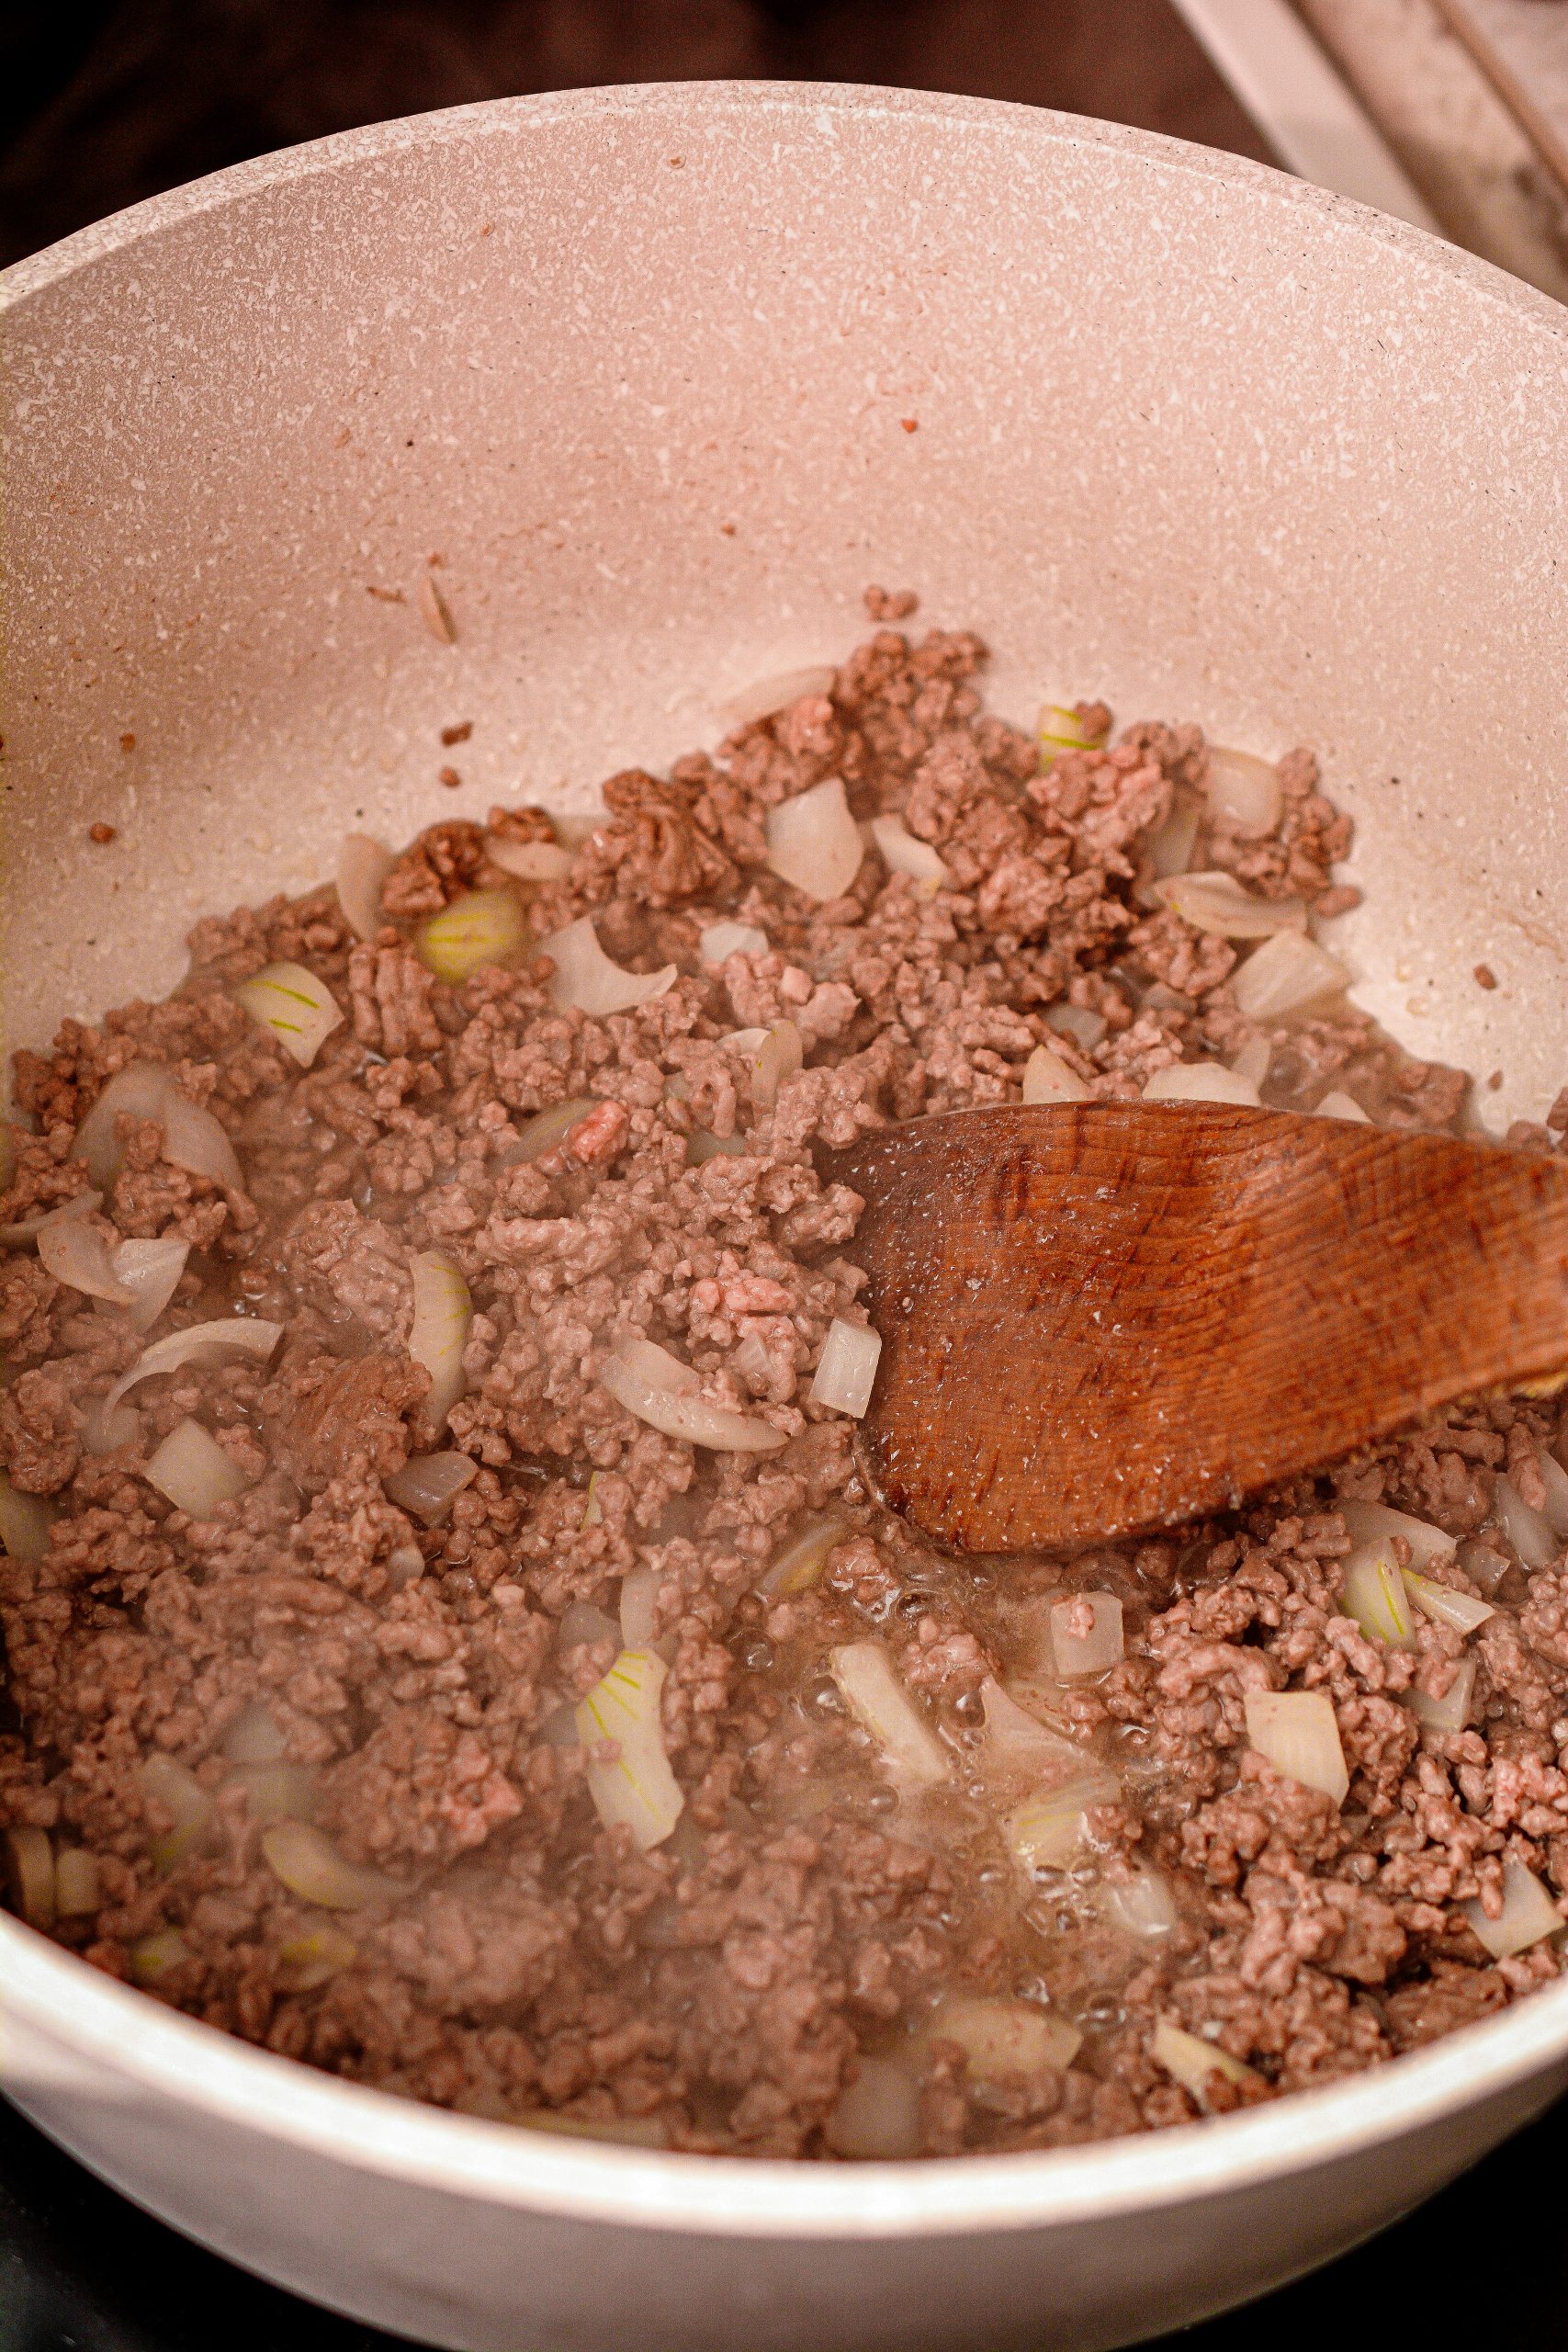 Add the ground beef and onion to a deep-sided saucepan over medium-high heat on the stove. Saute until the meat is browned and the onion is softened. Drain any excess fat.